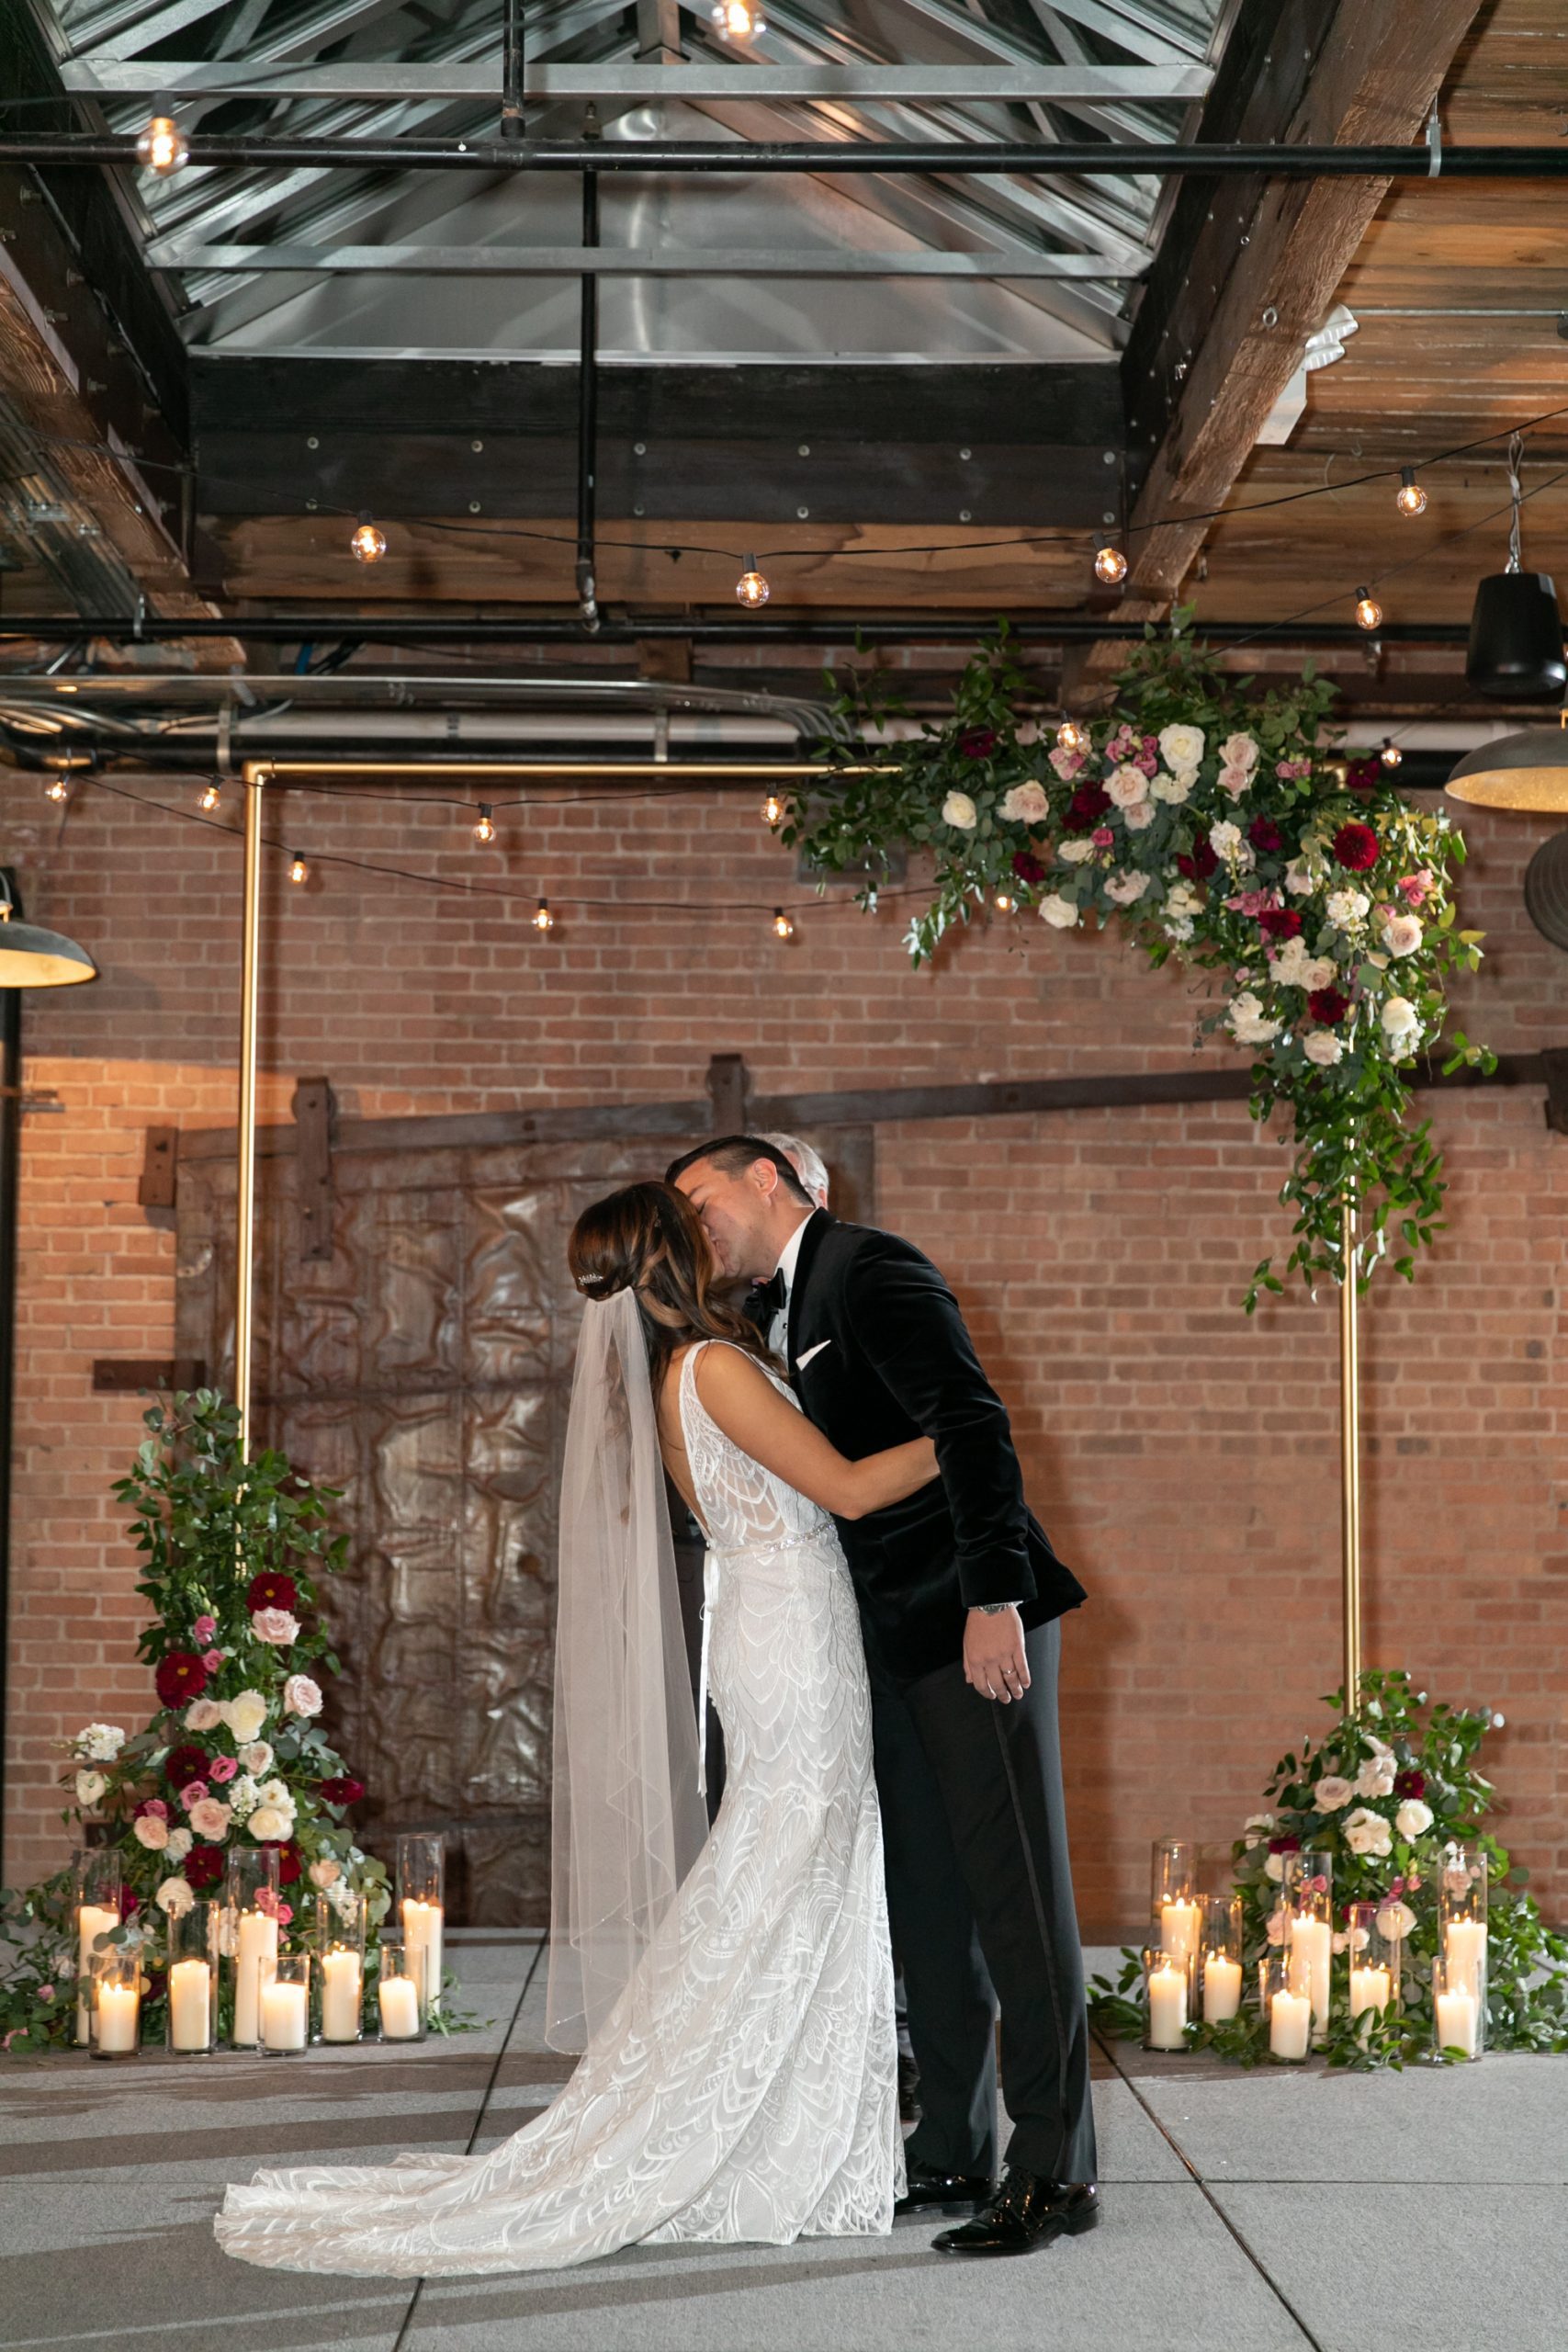 the couple kissed under the floral arch at their Morgan Manufacturing wedding